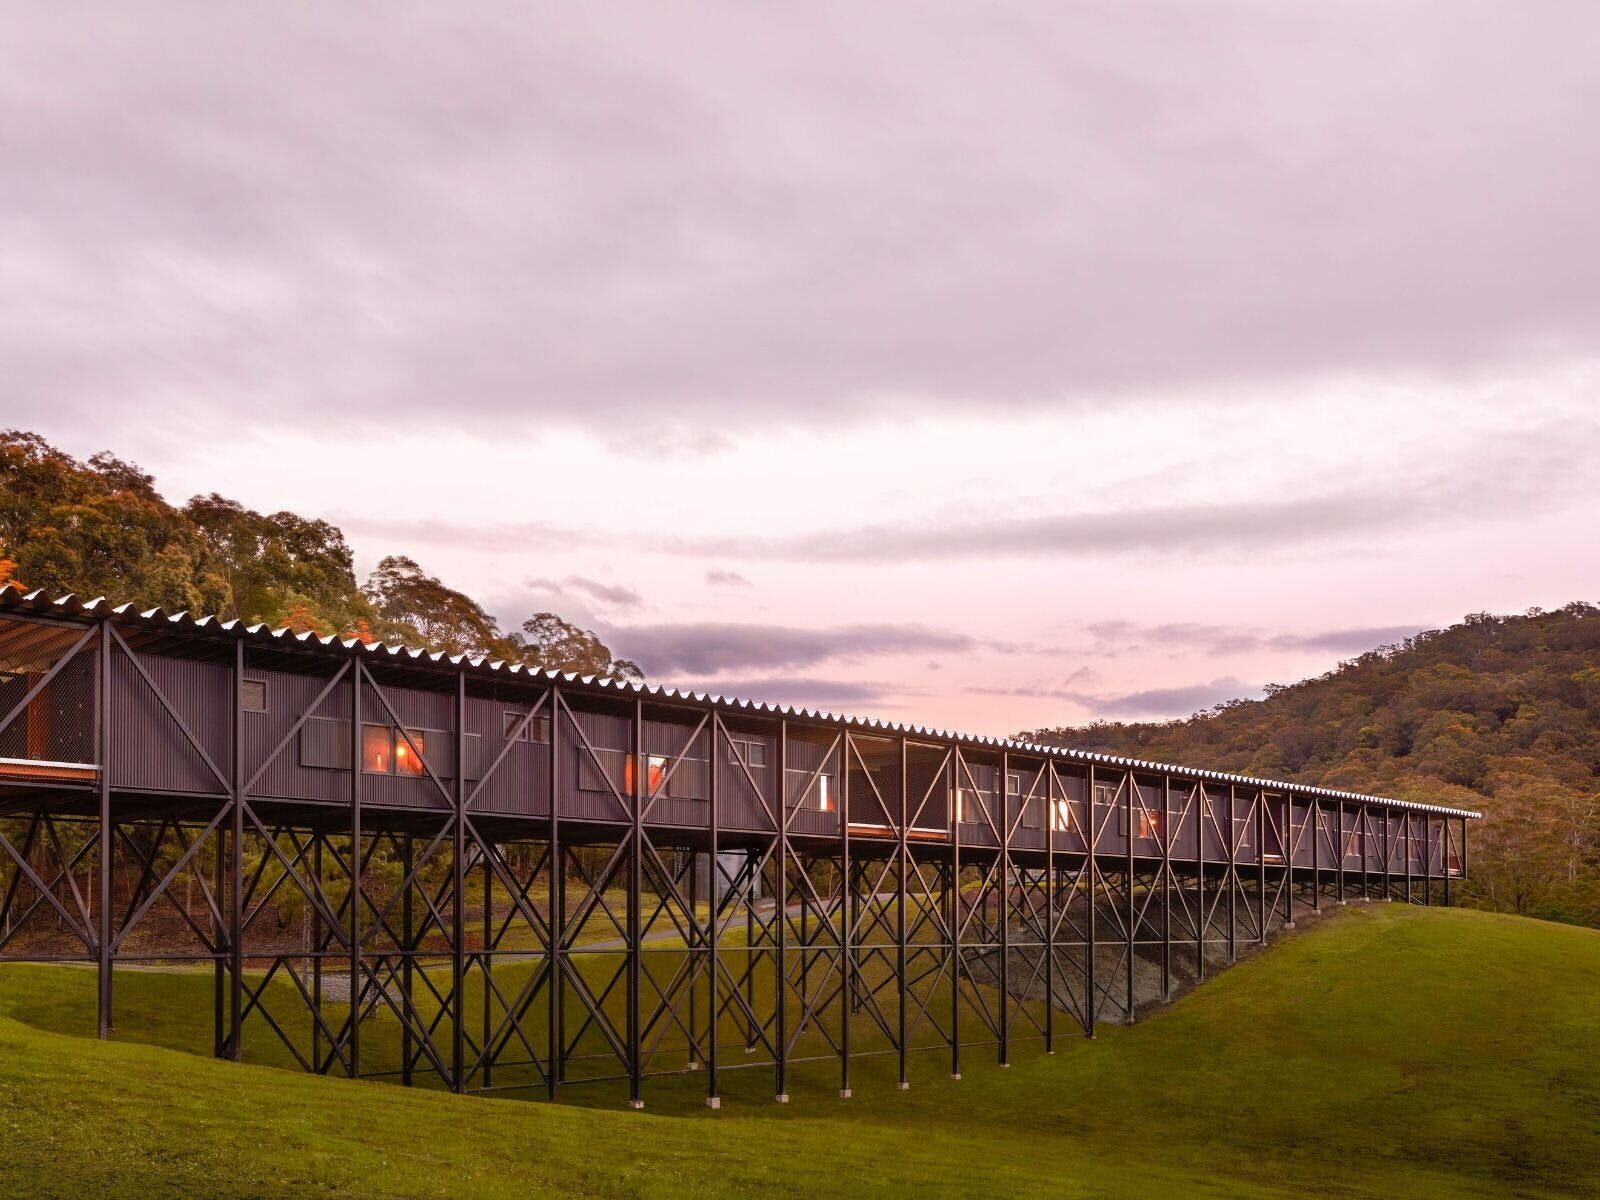 A long wooden structure spans 160m across a grassy gully with purple twilight skies behind